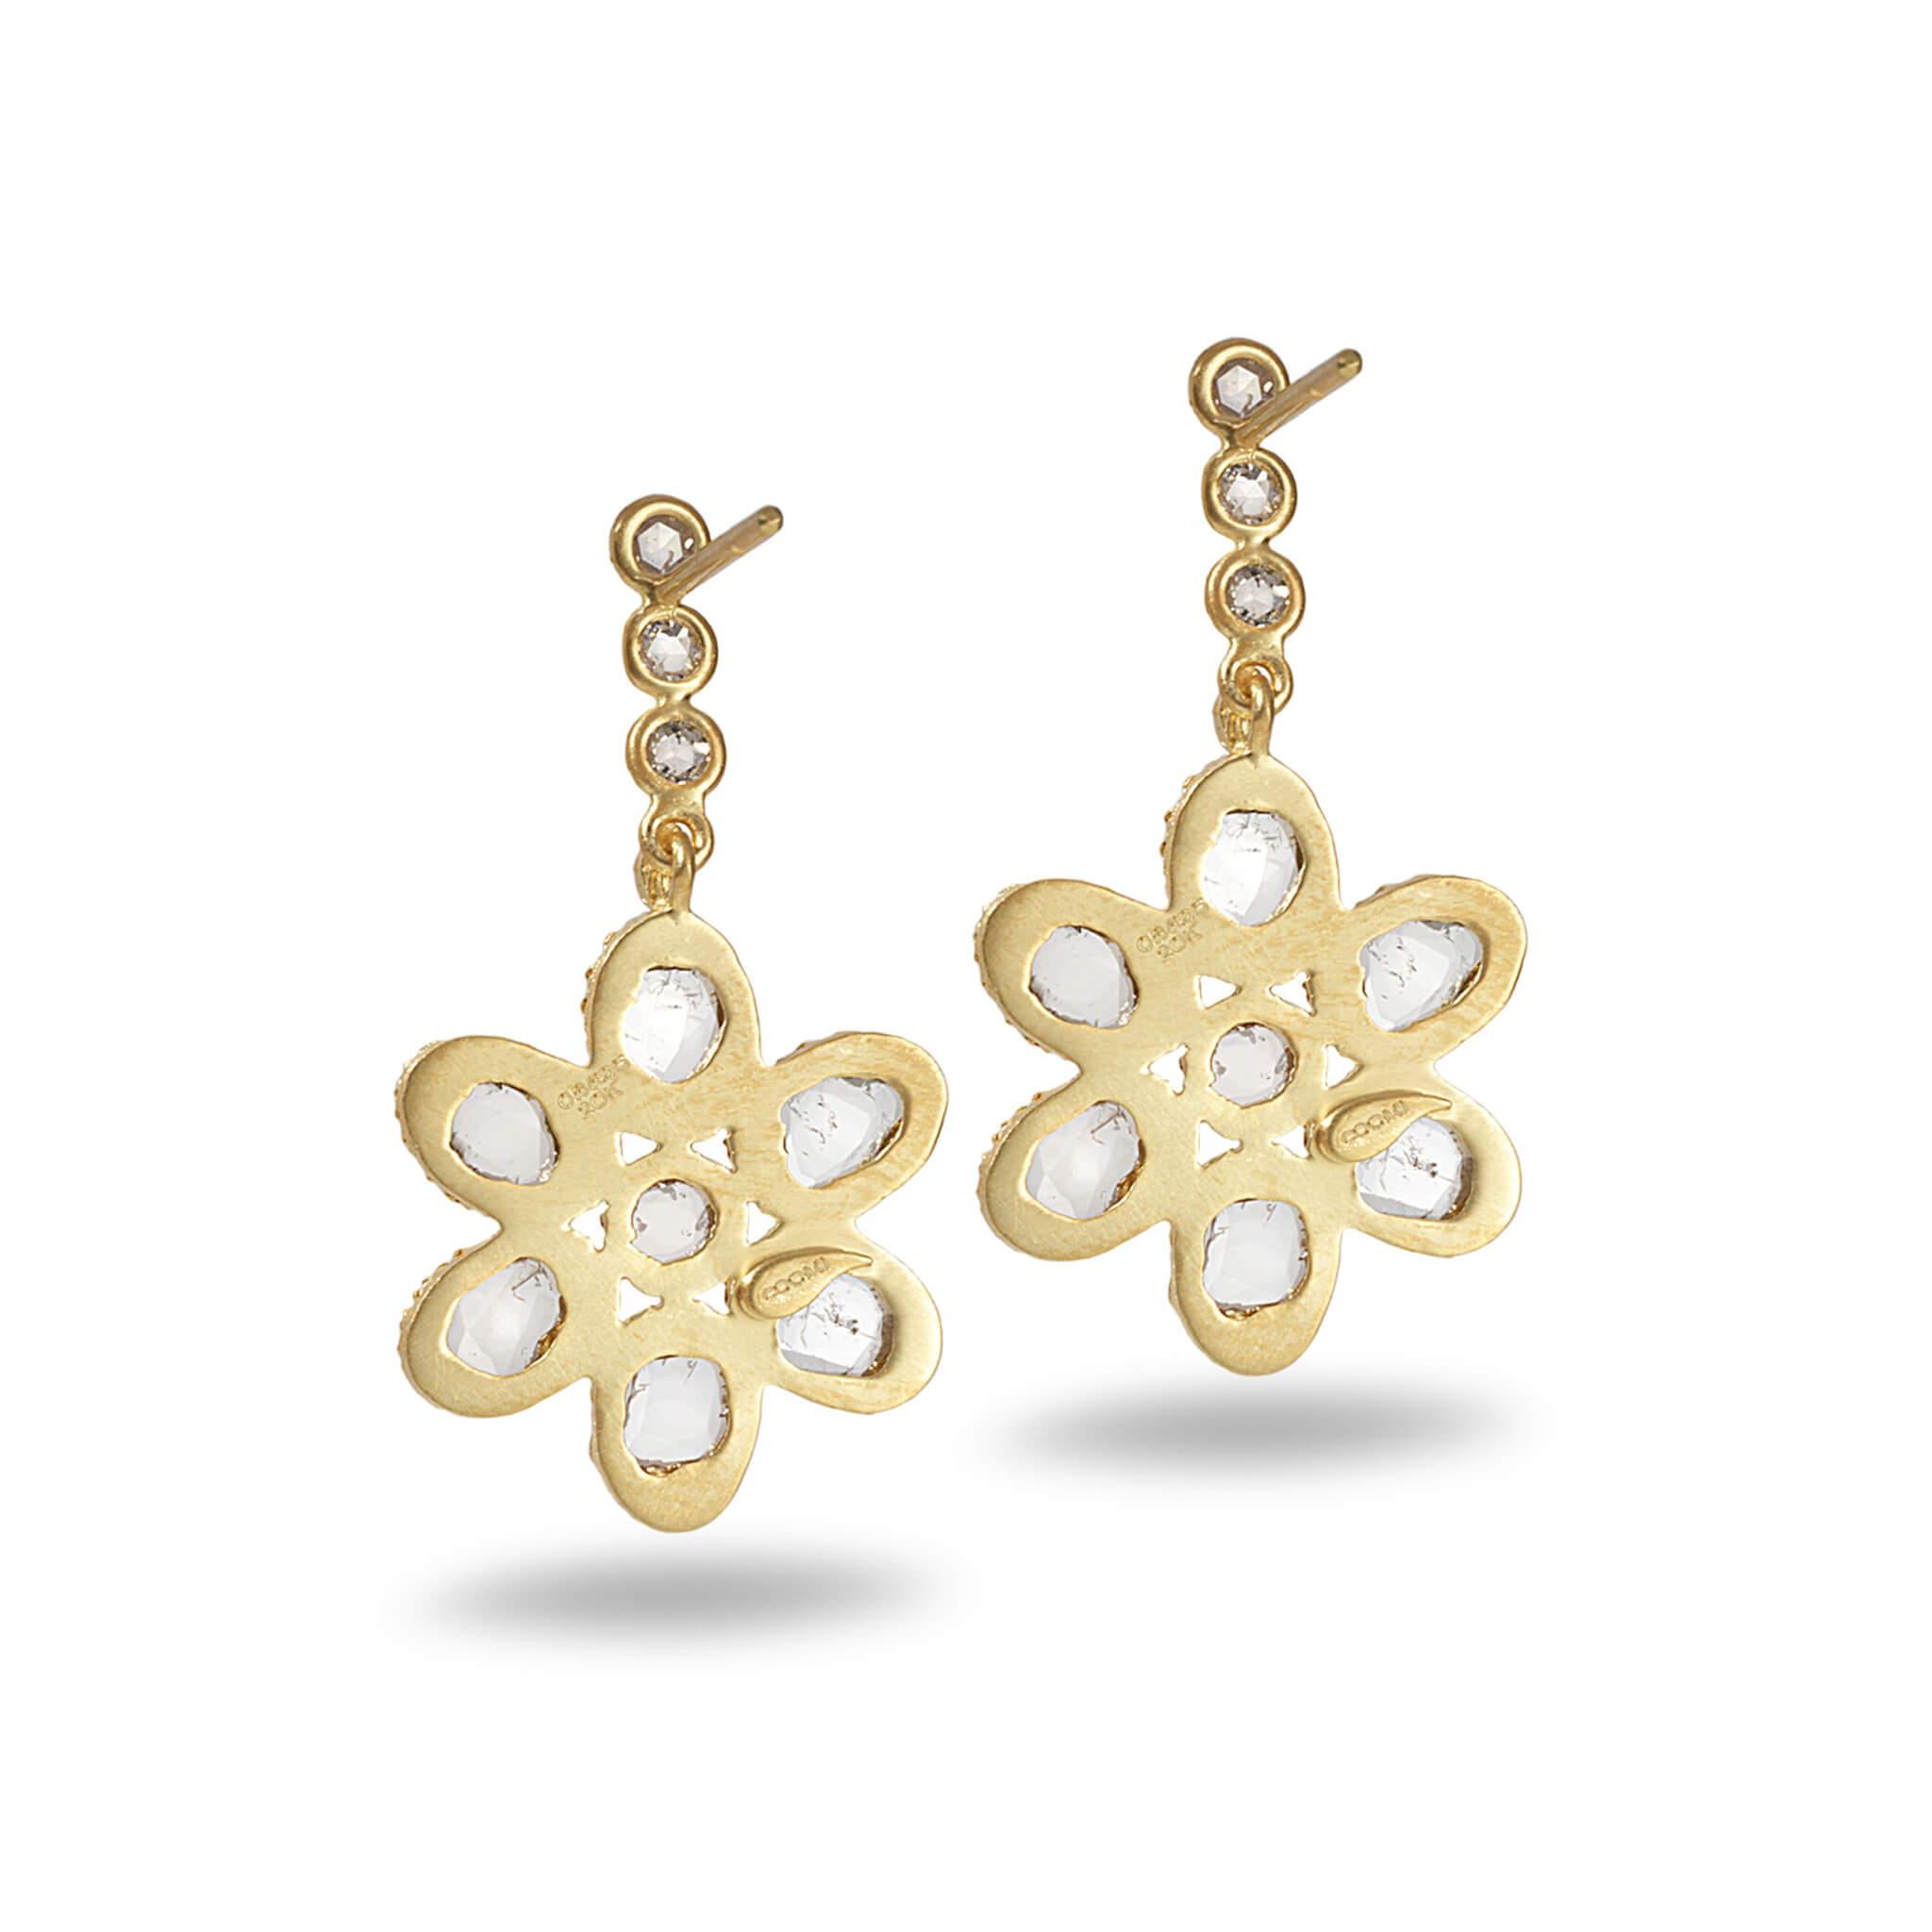 Affinity flower earrings set in 20K yellow gold with 1.47cts diamond.
